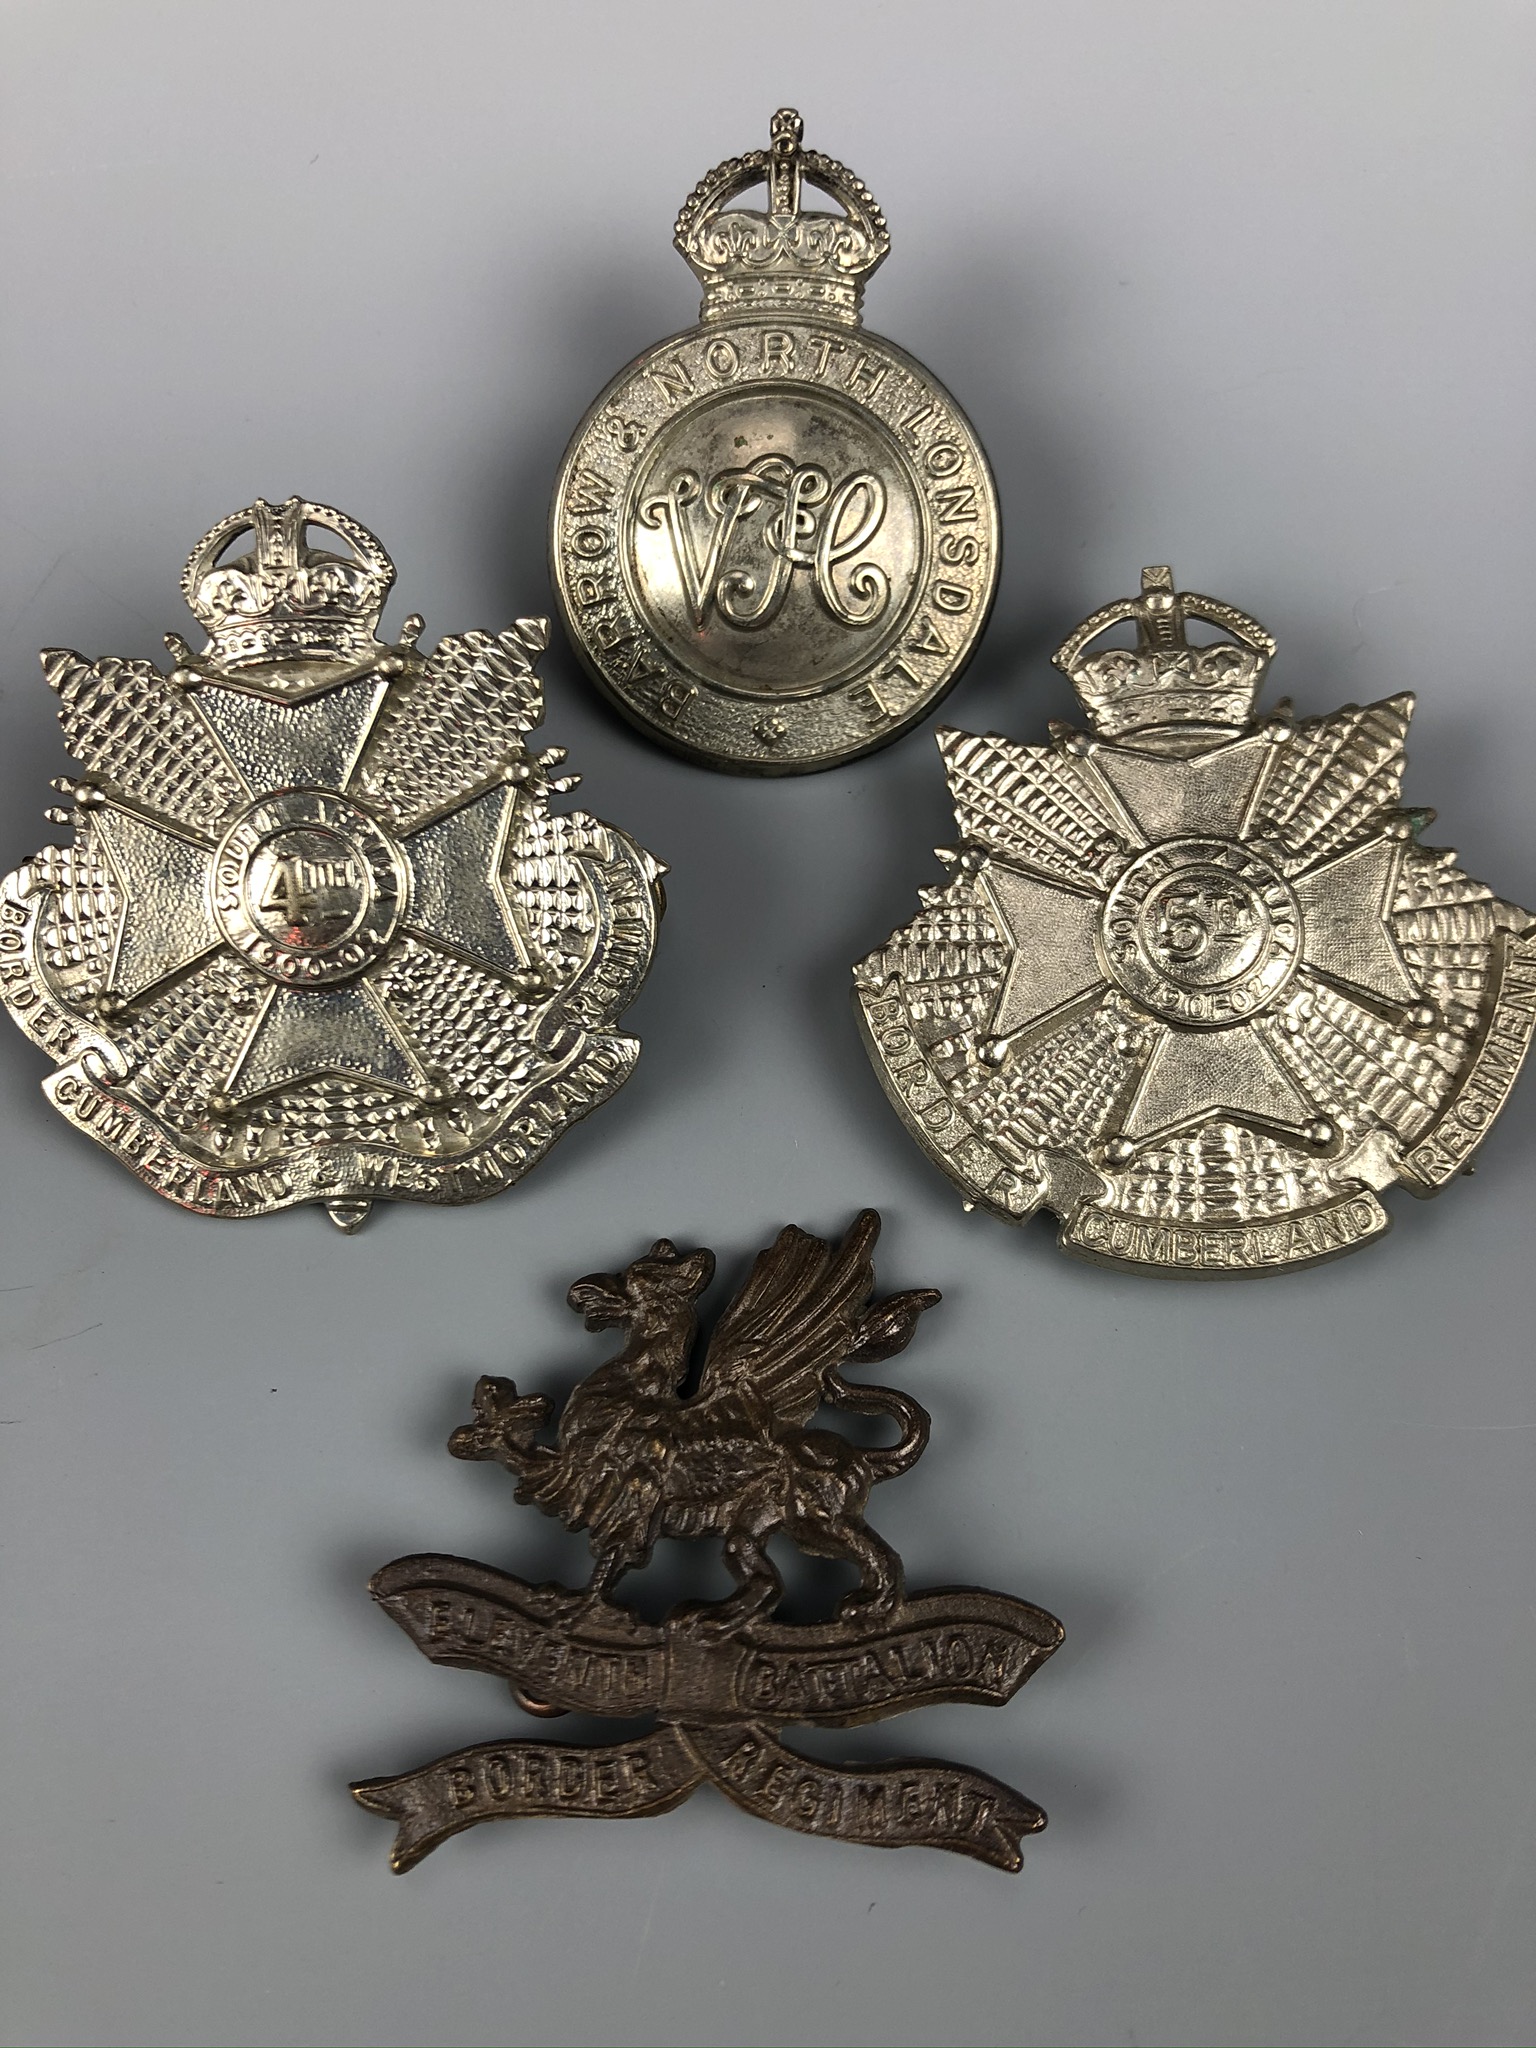 An 11th (Lonsdale) Battalion Officer's Service Dress cap badge together with 4th and 5th Battalion